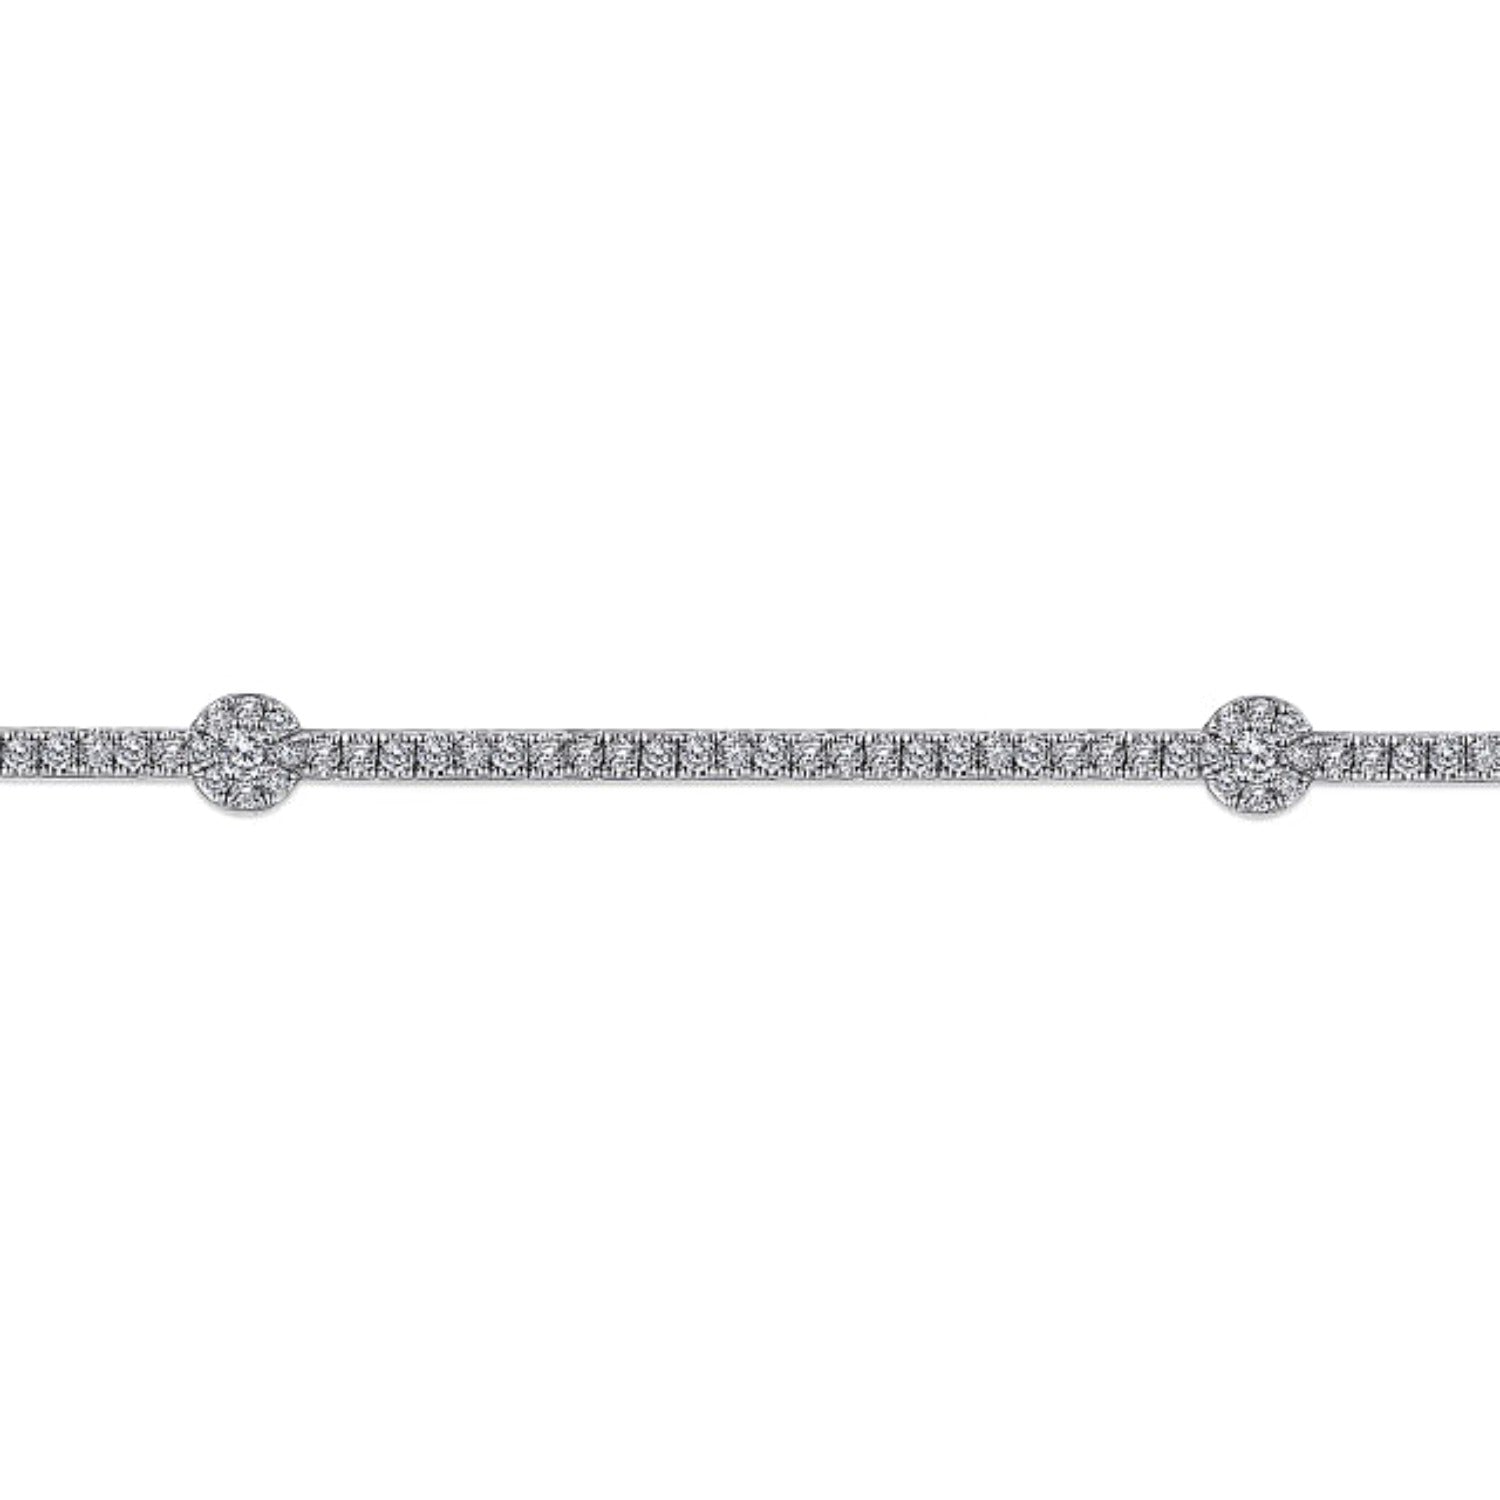 These are some of the diamond tennis bracelet designs in our collection.  Each diamond is handset perfectly in the setting and sparkles… | Instagram